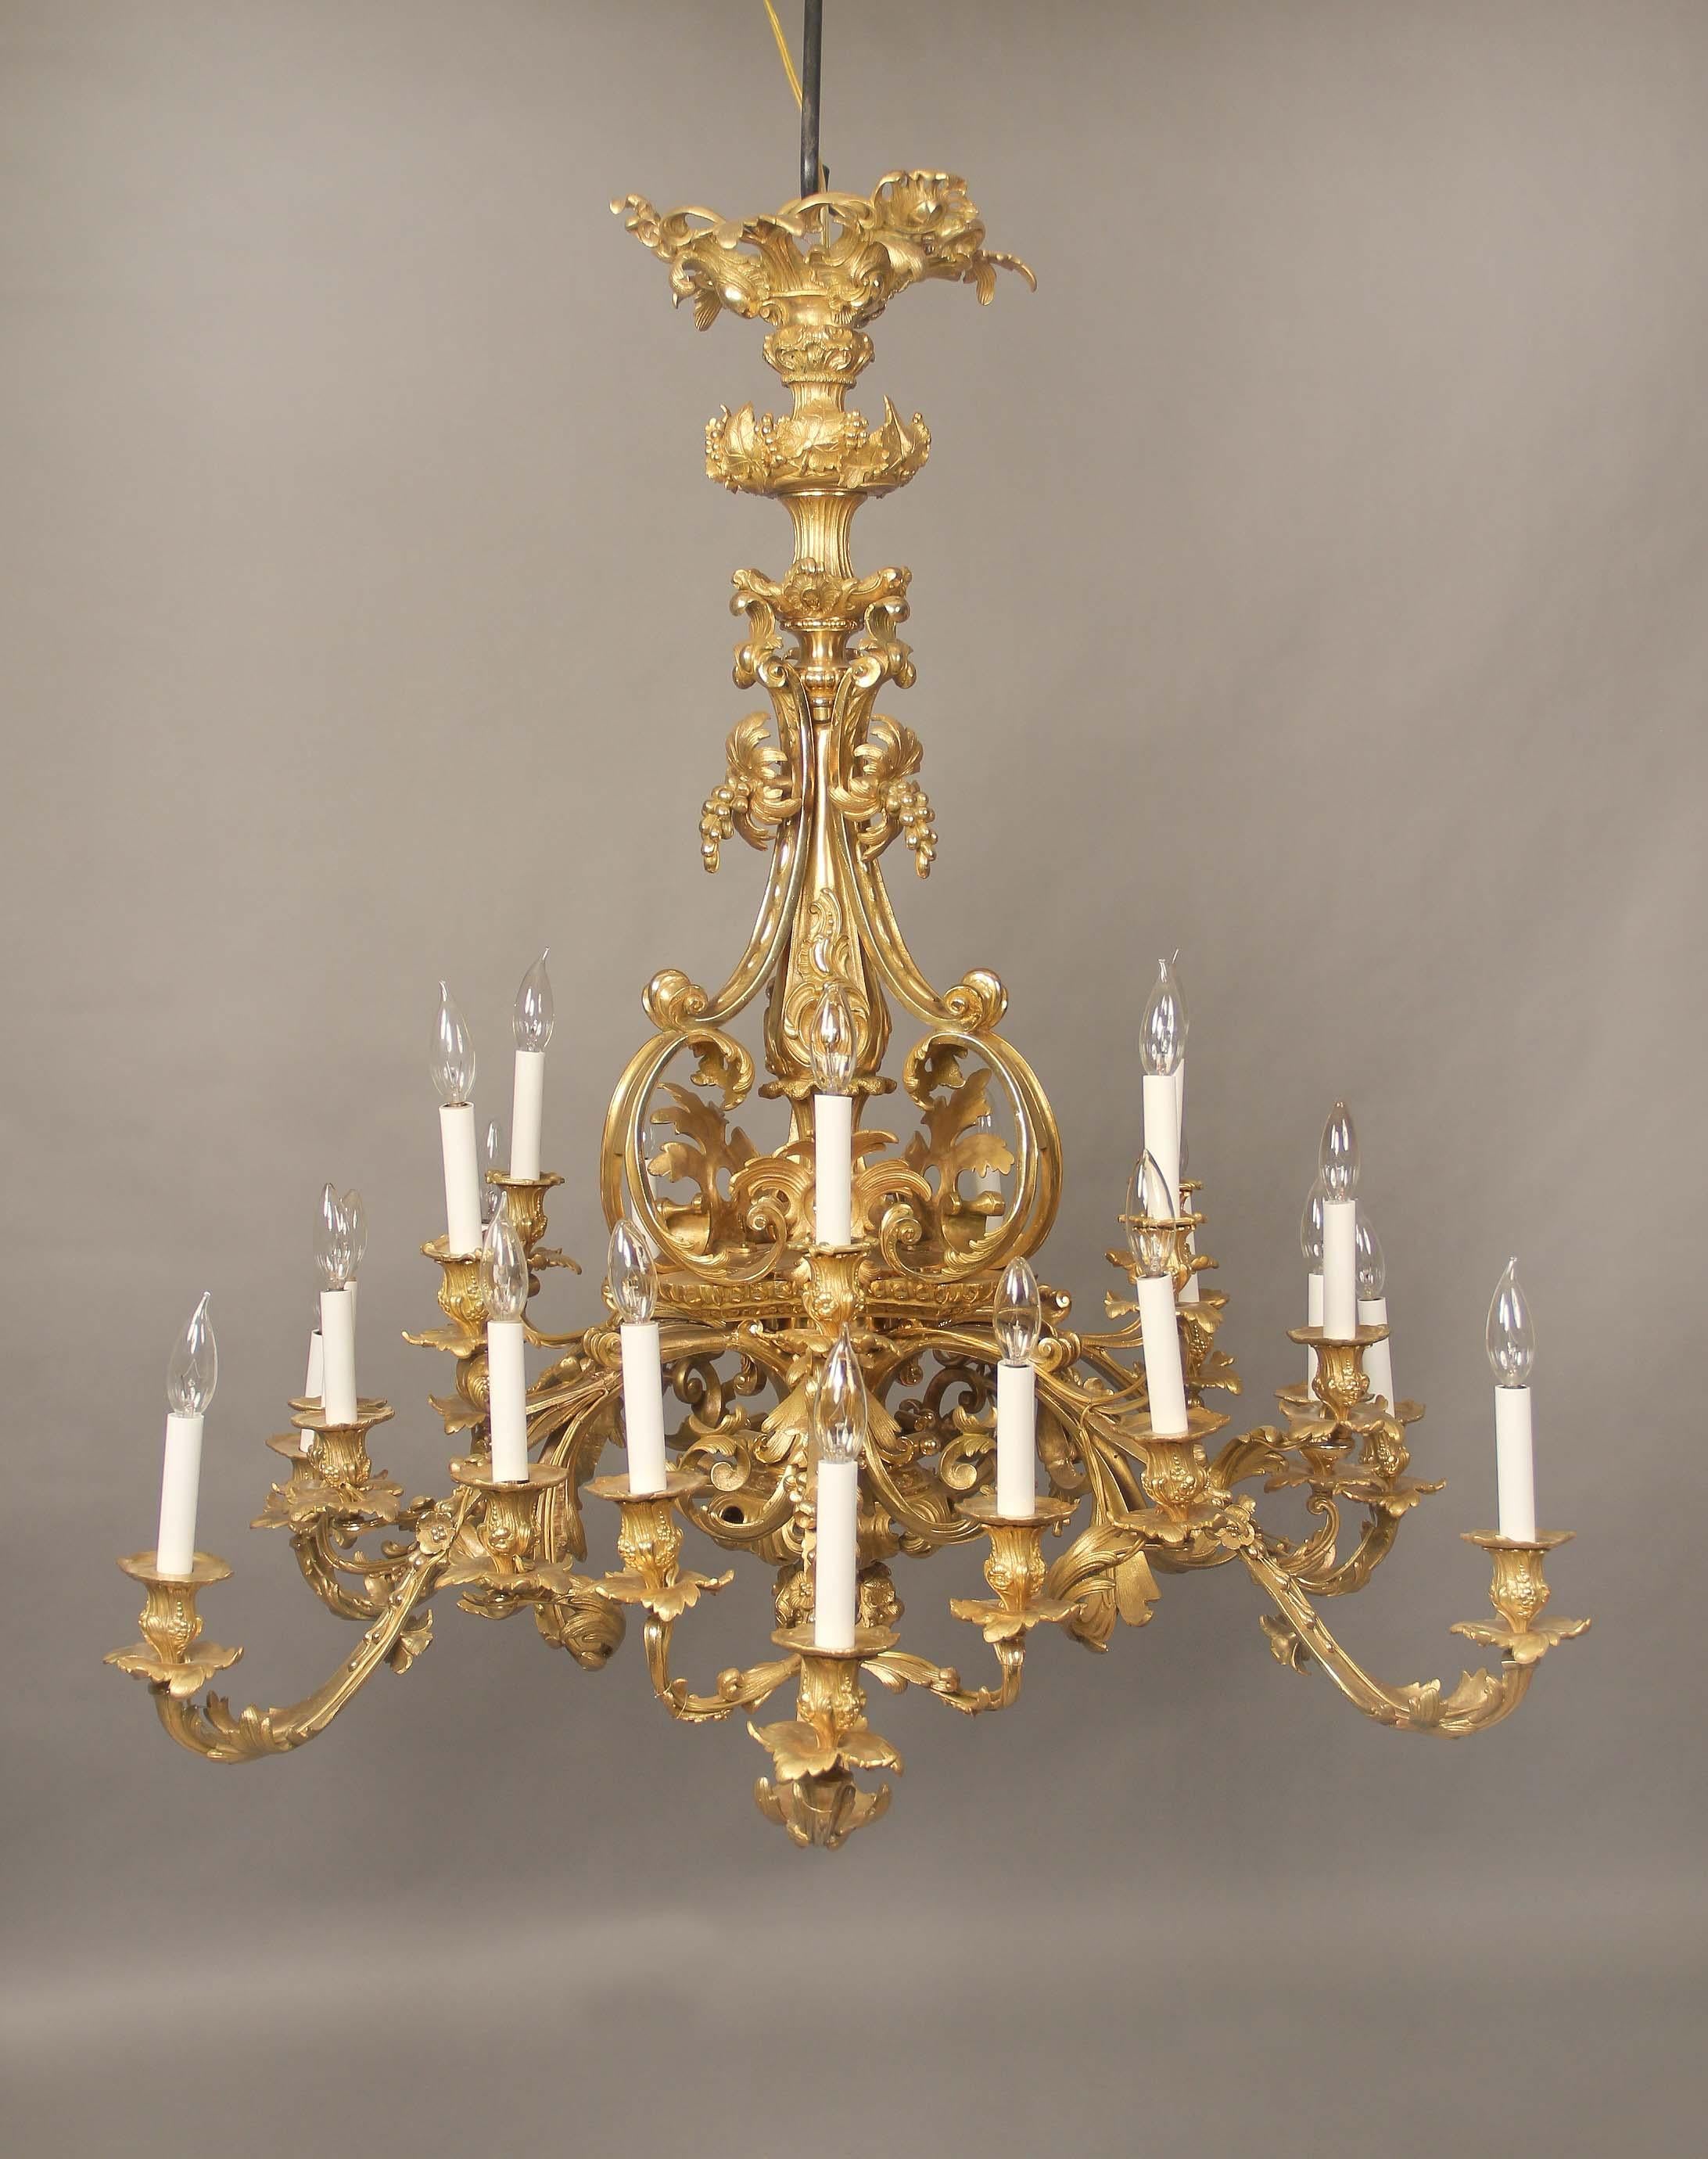 A fine early 20th century gilt bronze twenty-four light chandelier.

The all bronze chandelier with a central floral stem with foliage and fruit designs along the body and arms, twenty four long branch tiered perimeter lights.

If you are